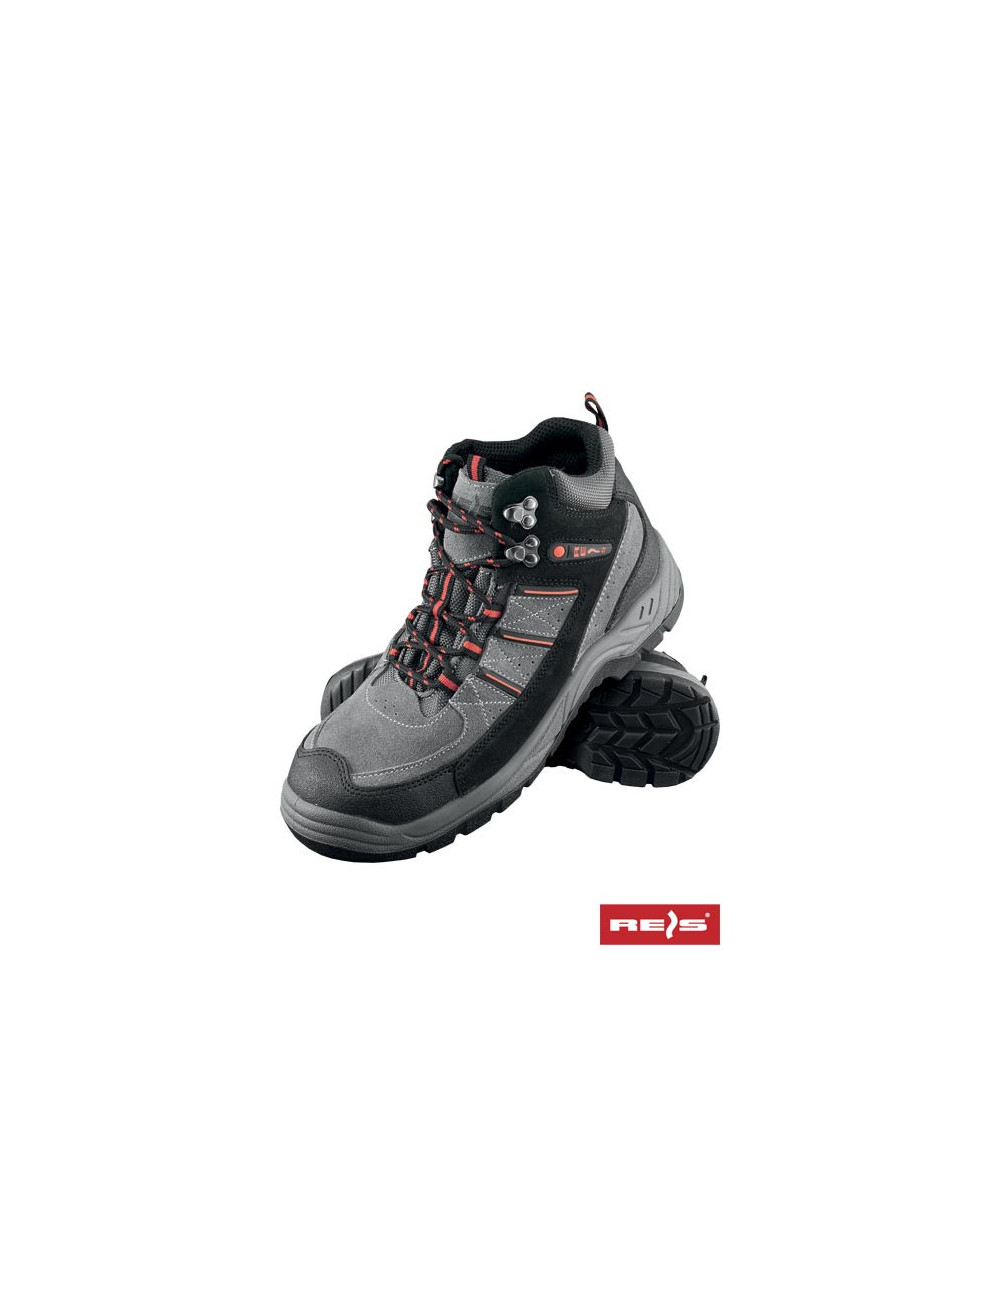 Safety boots brvibrant-t bsc black-grey-red Reis